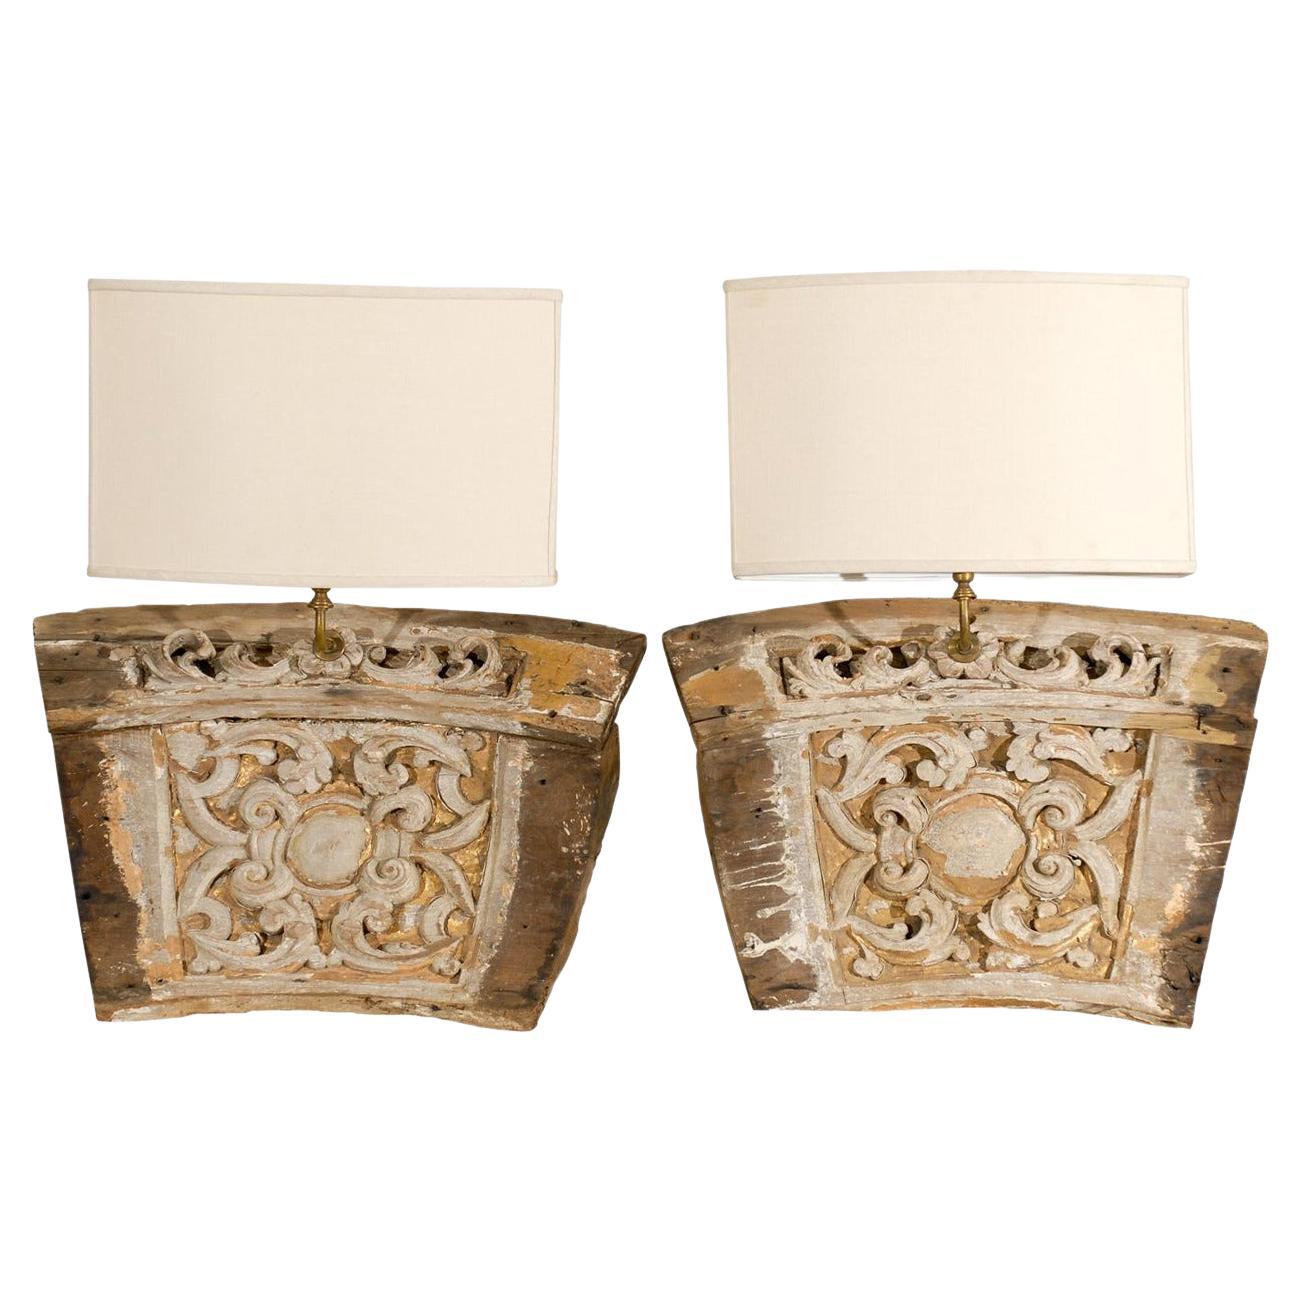 A Single 19th Century Italian Wooden Fragment Made into a Sconce with Gilding For Sale